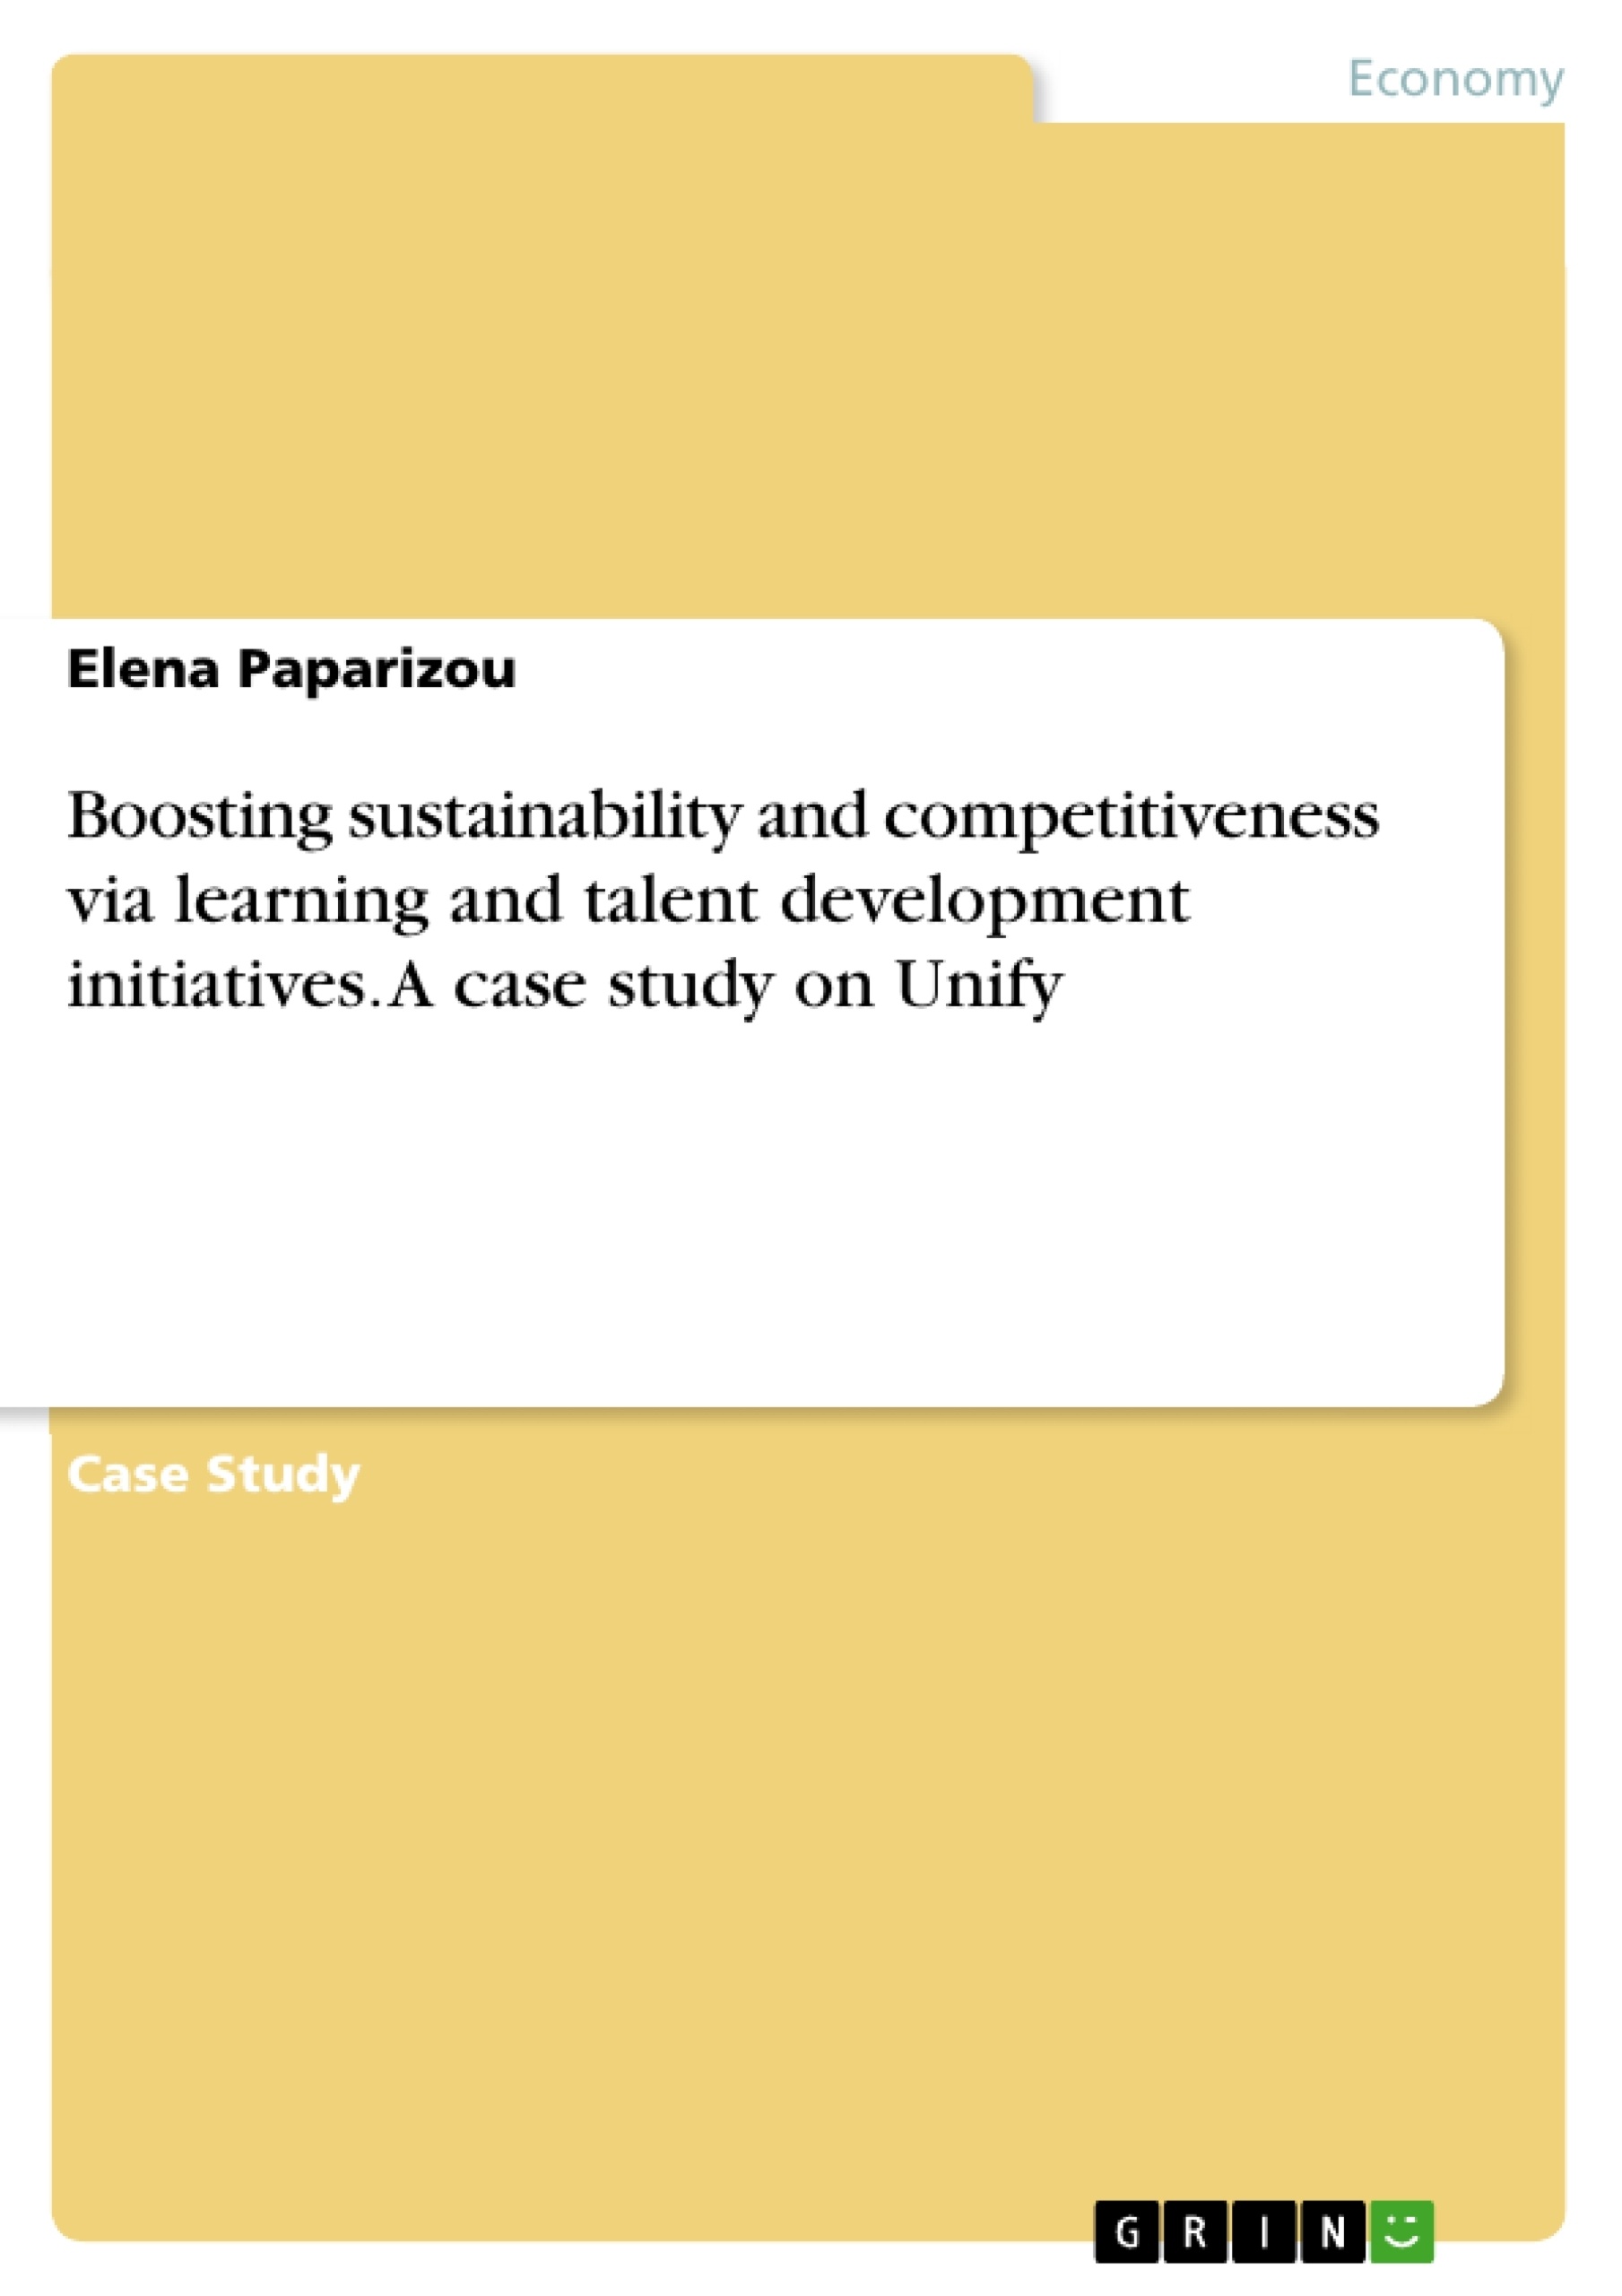 Titel: Boosting sustainability and competitiveness via learning and talent development initiatives. A case study on Unify